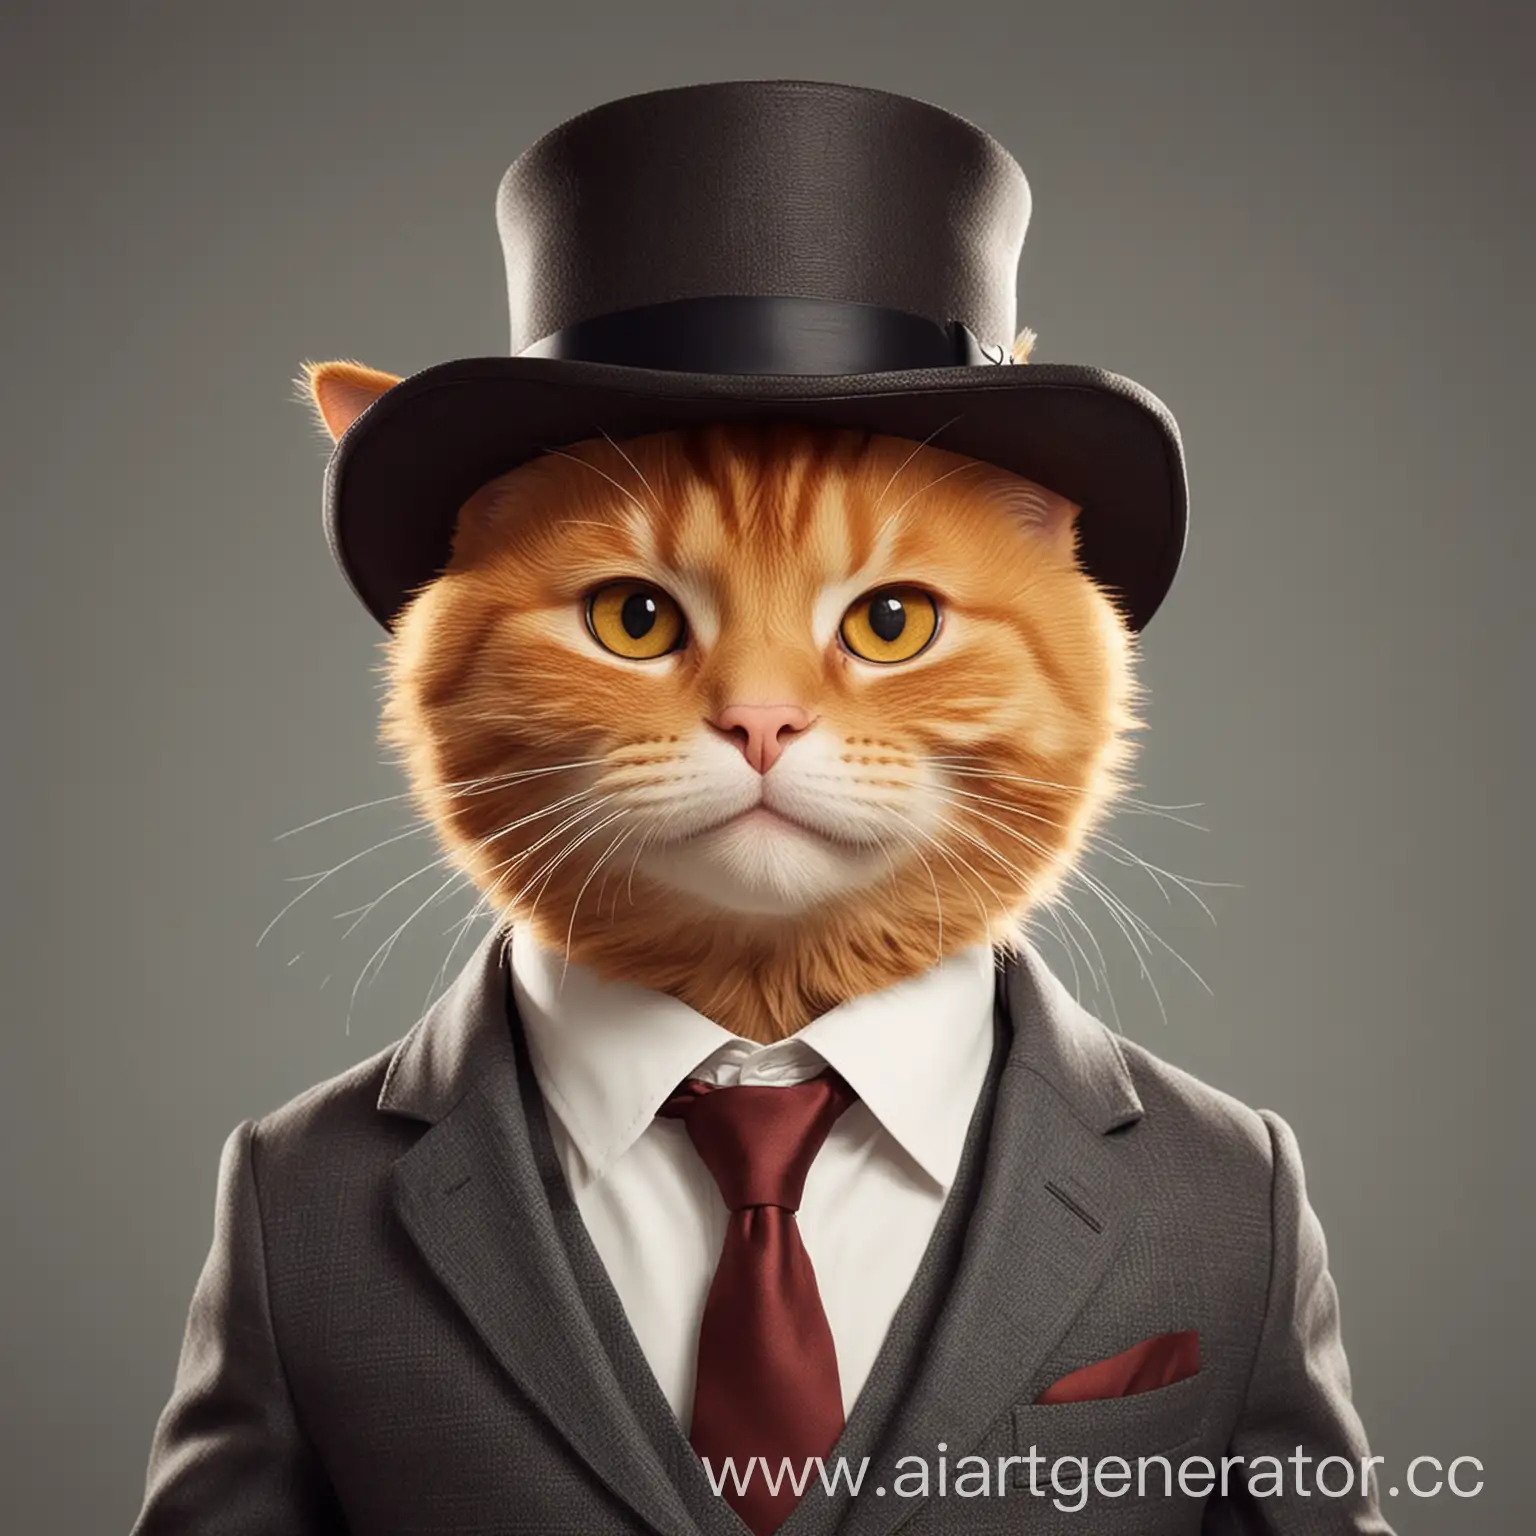 Animated-Ginger-Cat-in-Dapper-Hat-and-Suit